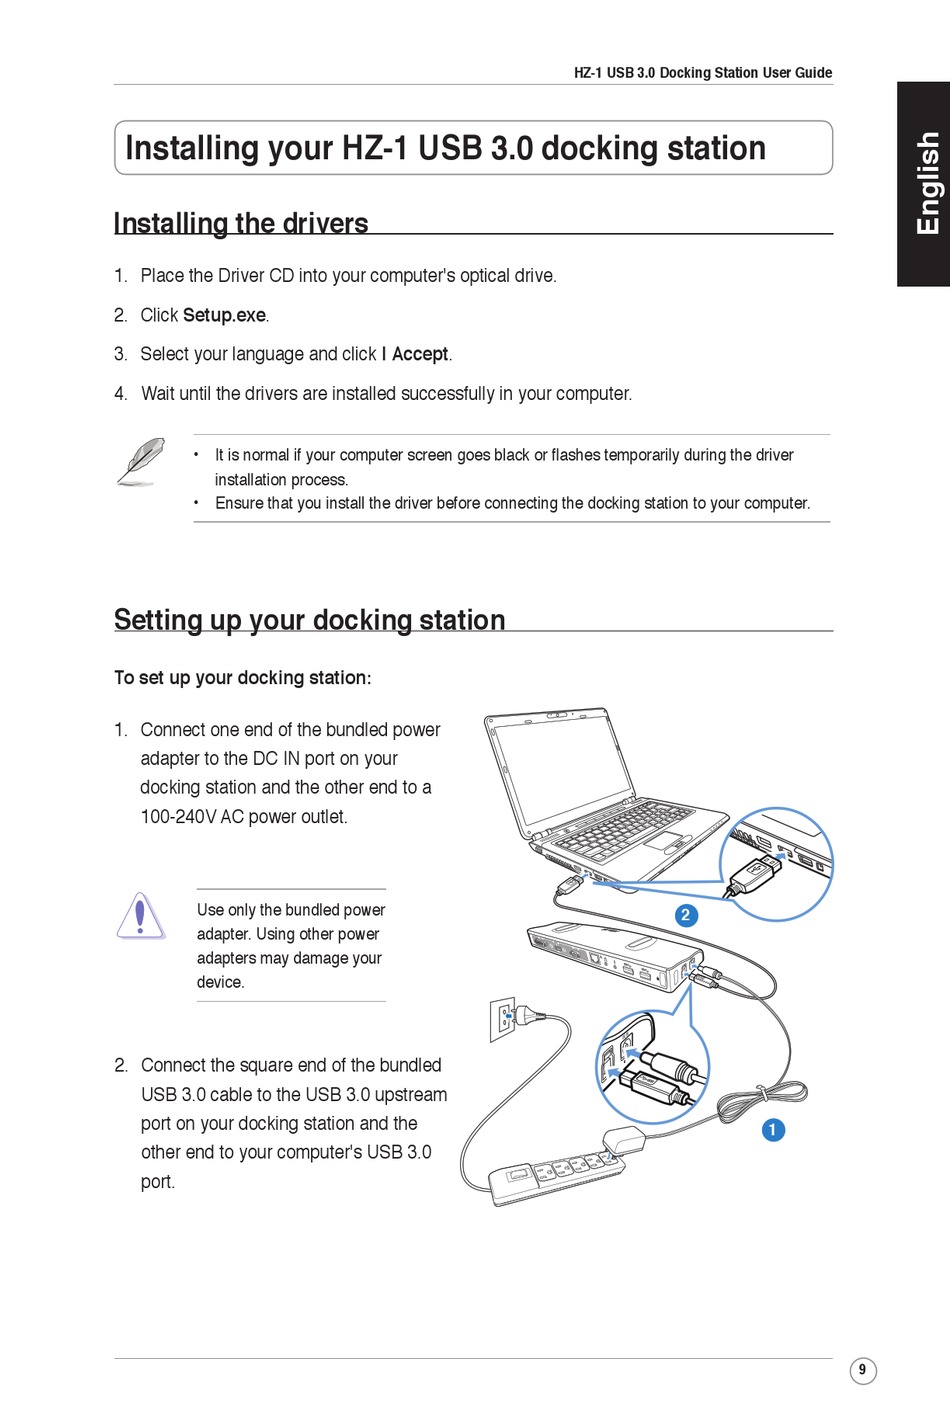 Installing The Drivers; Setting Up Docking Station - Asus HZ-1 User Manual [Page 9] | ManualsLib